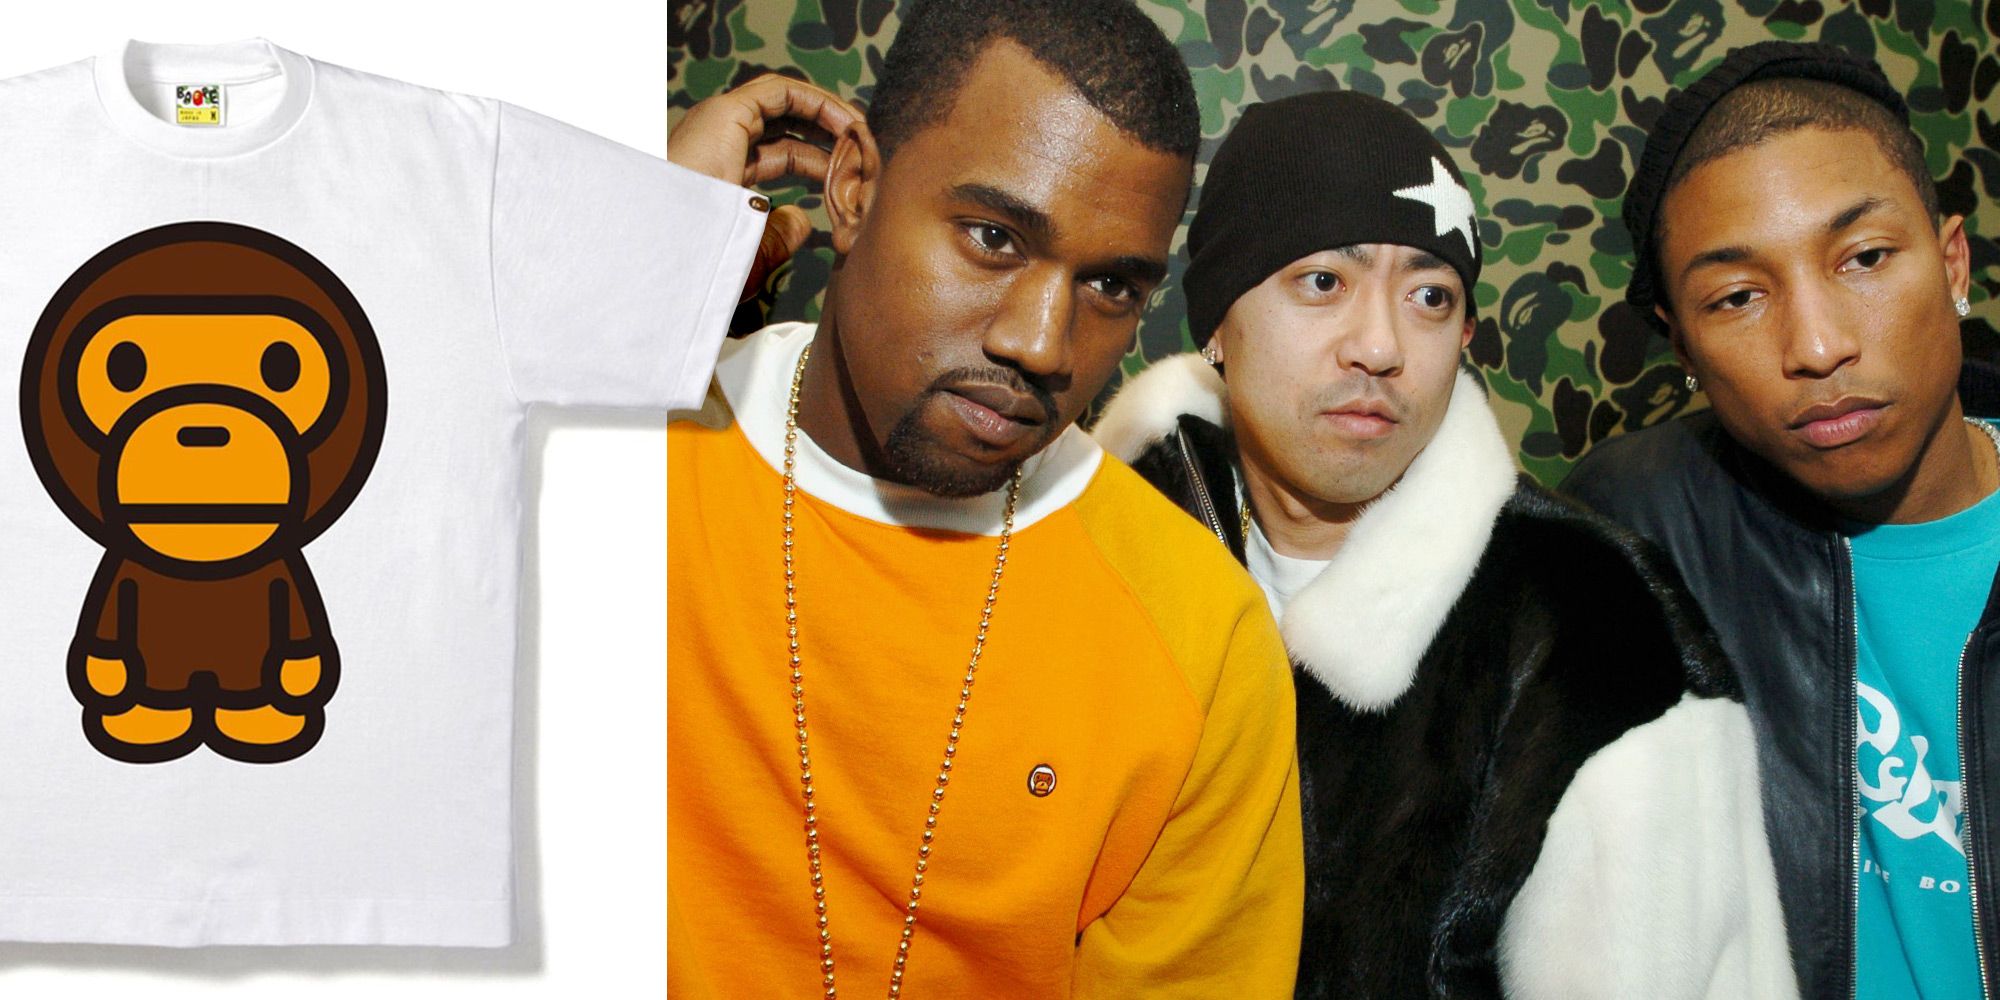 The Evolution of Streetwear: From Icons like Bape, Stussy and